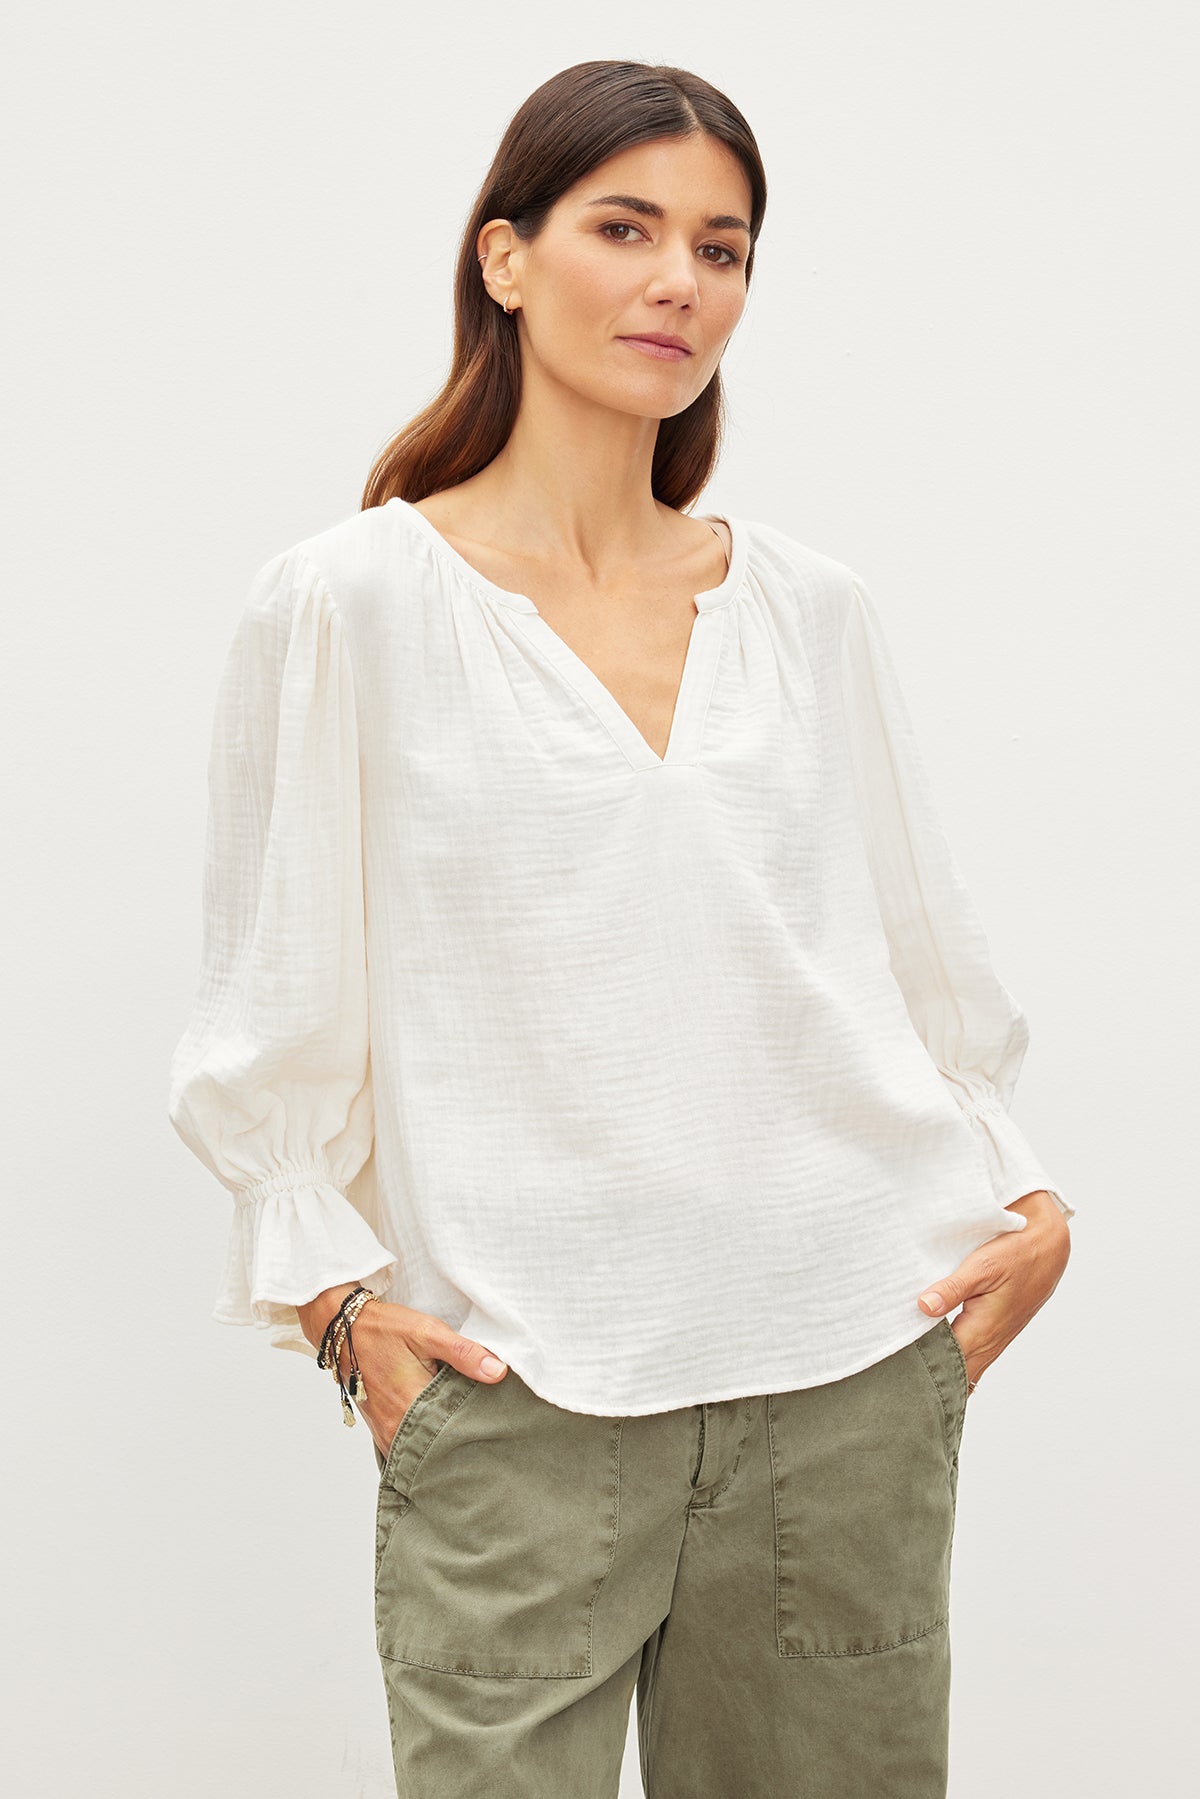   The model is wearing a relaxed fit MILLY COTTON GAUZE PEASANT TOP blouse and green pants made from cotton gauze, achieving effortless sophistication. Brand: Velvet by Graham & Spencer 